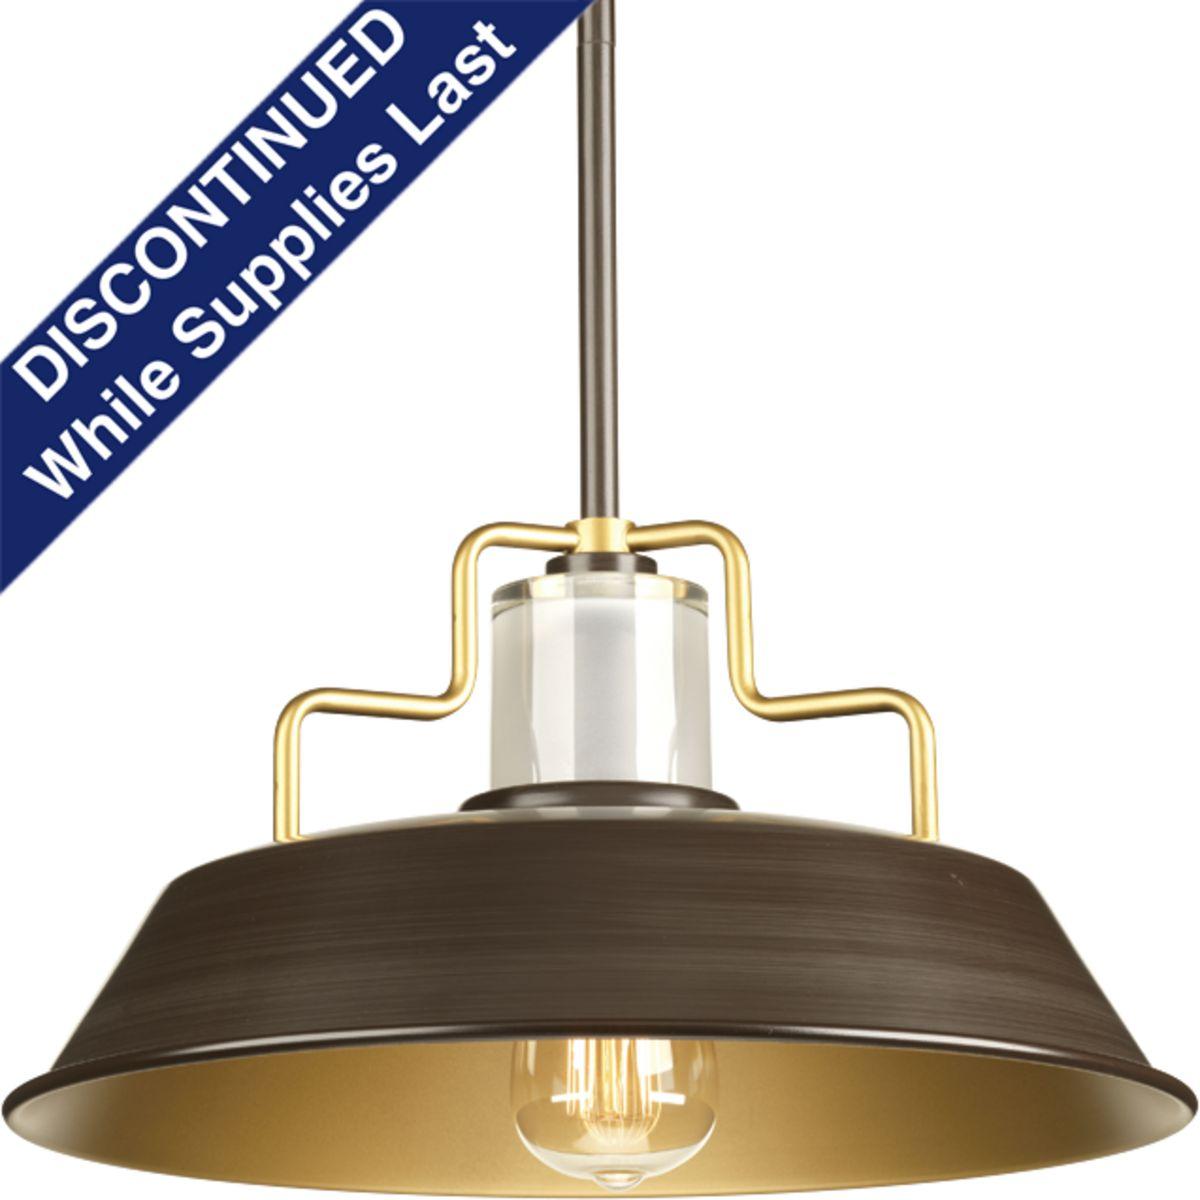 Hubbell P500034-020 One-light 14 inch pendant in the Archives collection contain carefully crafted accents and special details to achieve a vintage electric feel. Pendants are illuminated with light reflected through a clear piece of glass that is sandblasted on the inside a